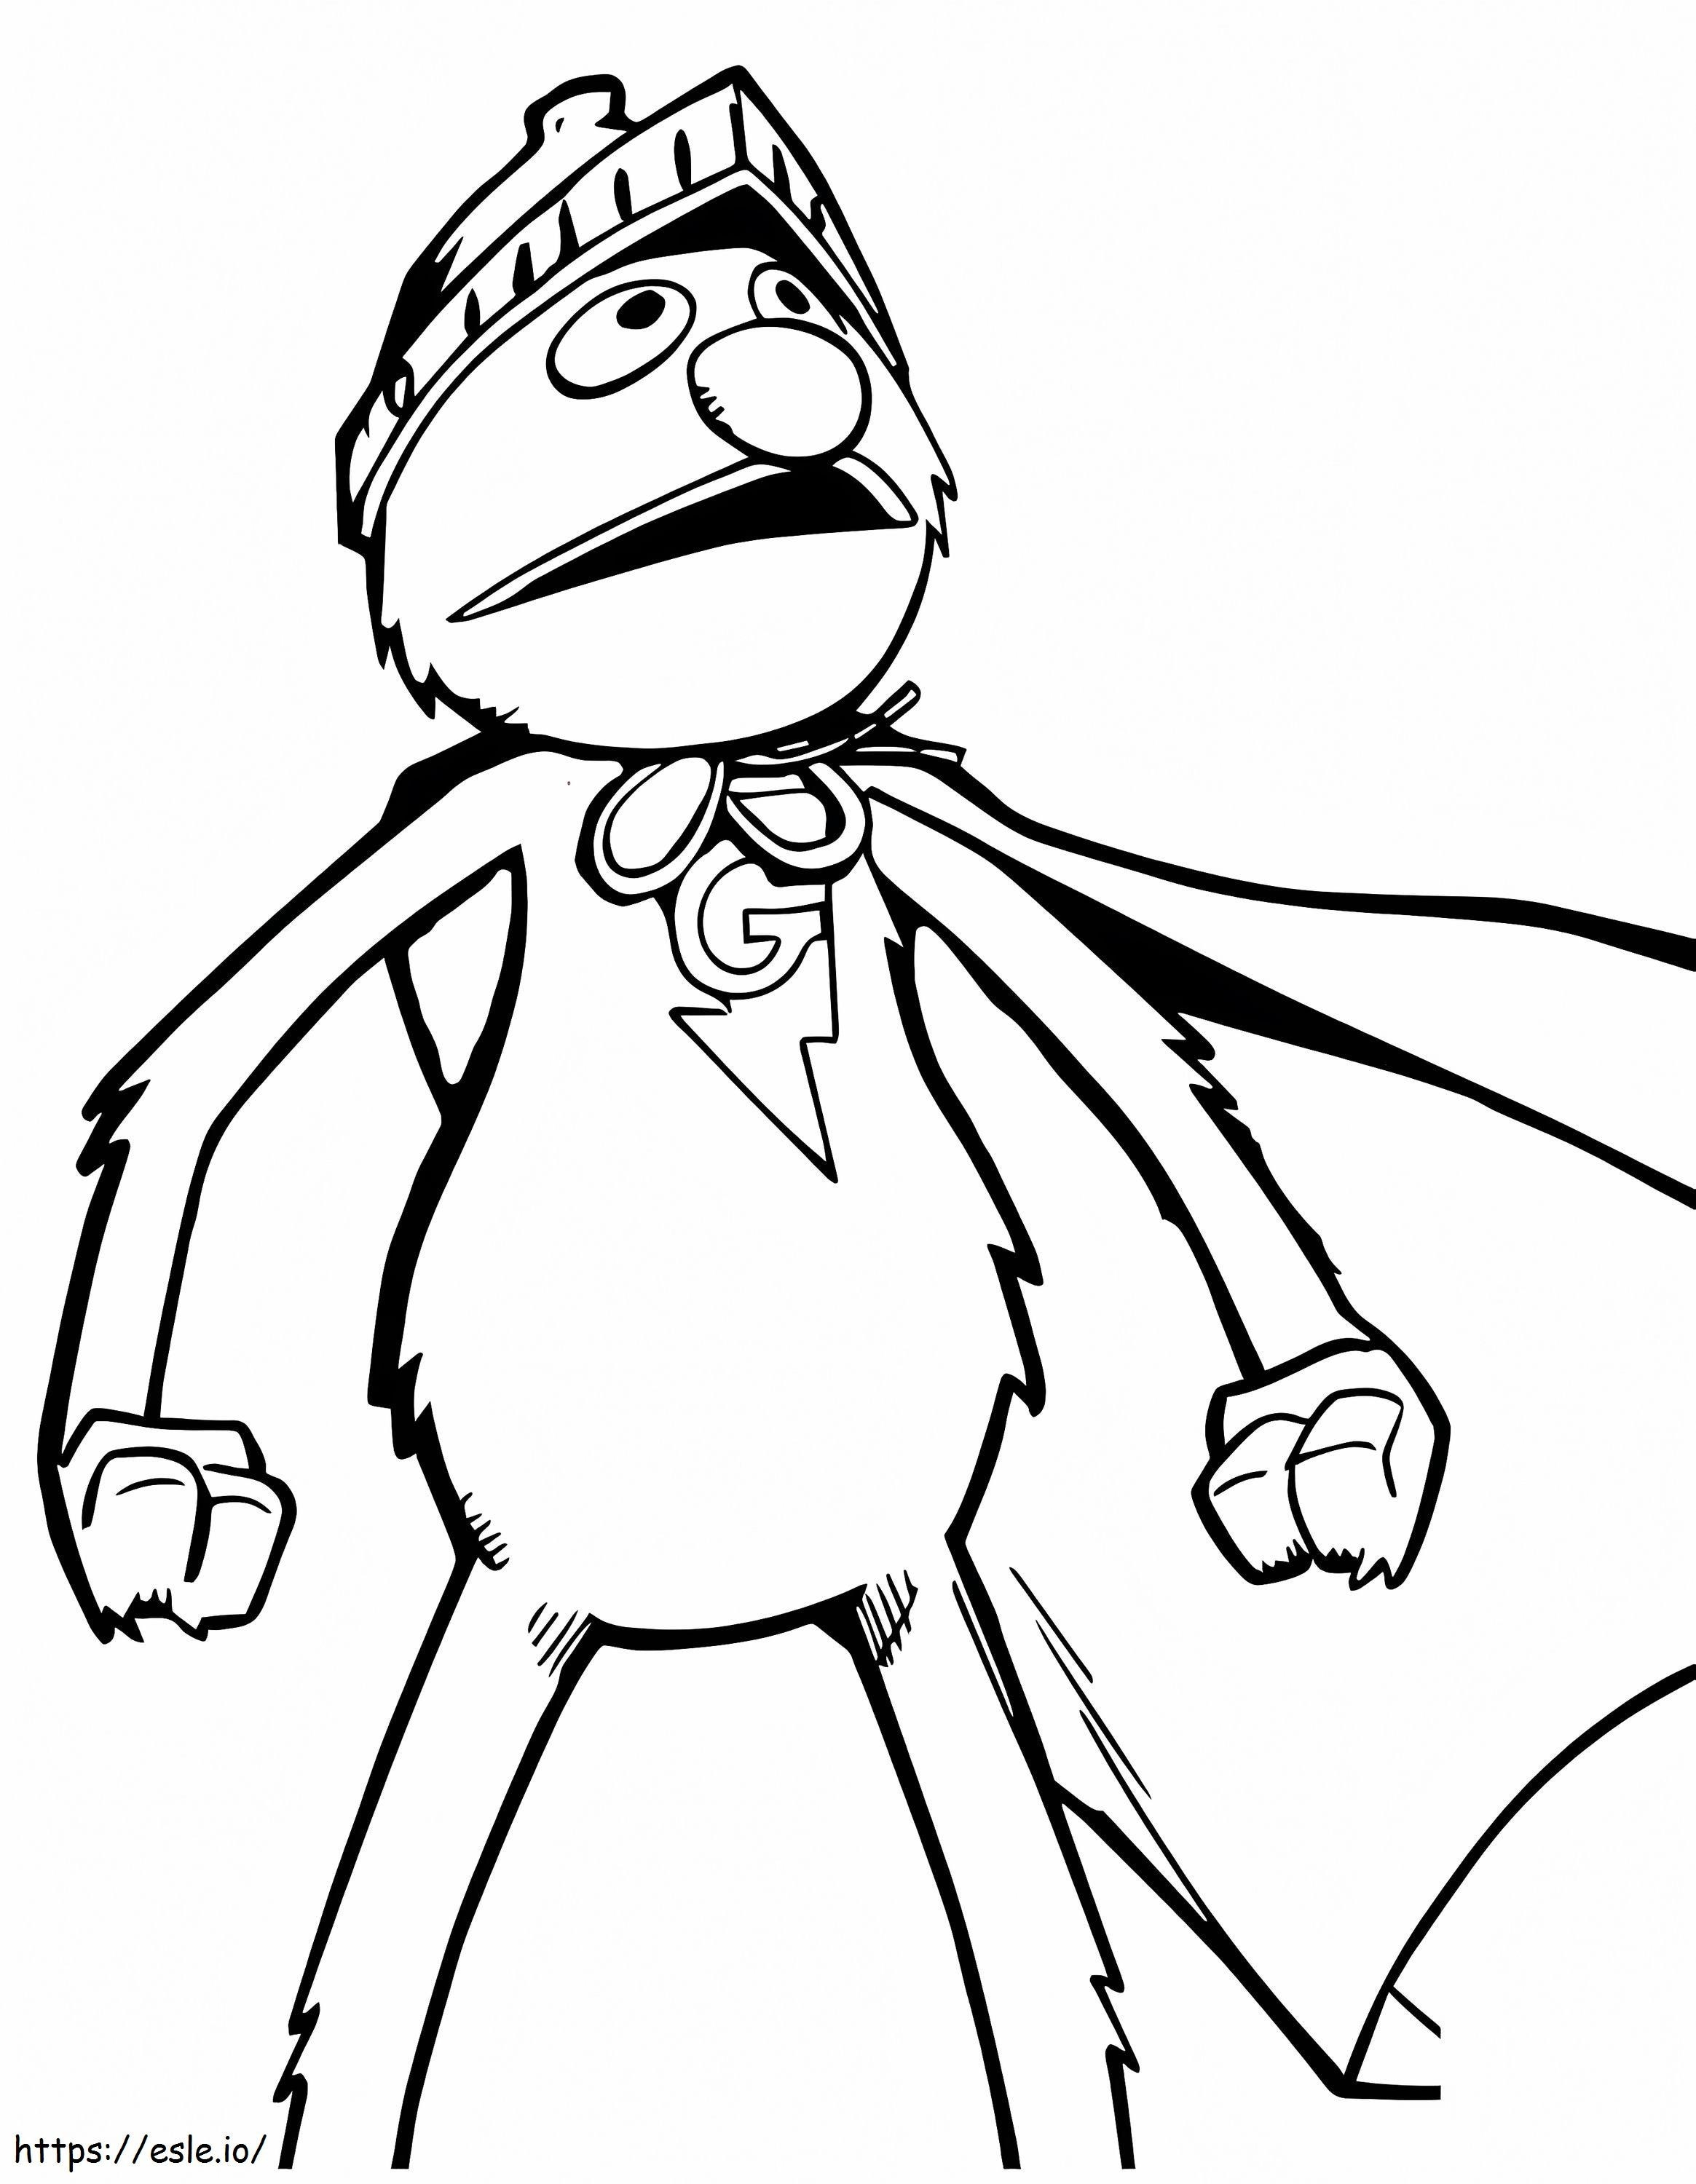 Sesame Street Super Grover coloring page